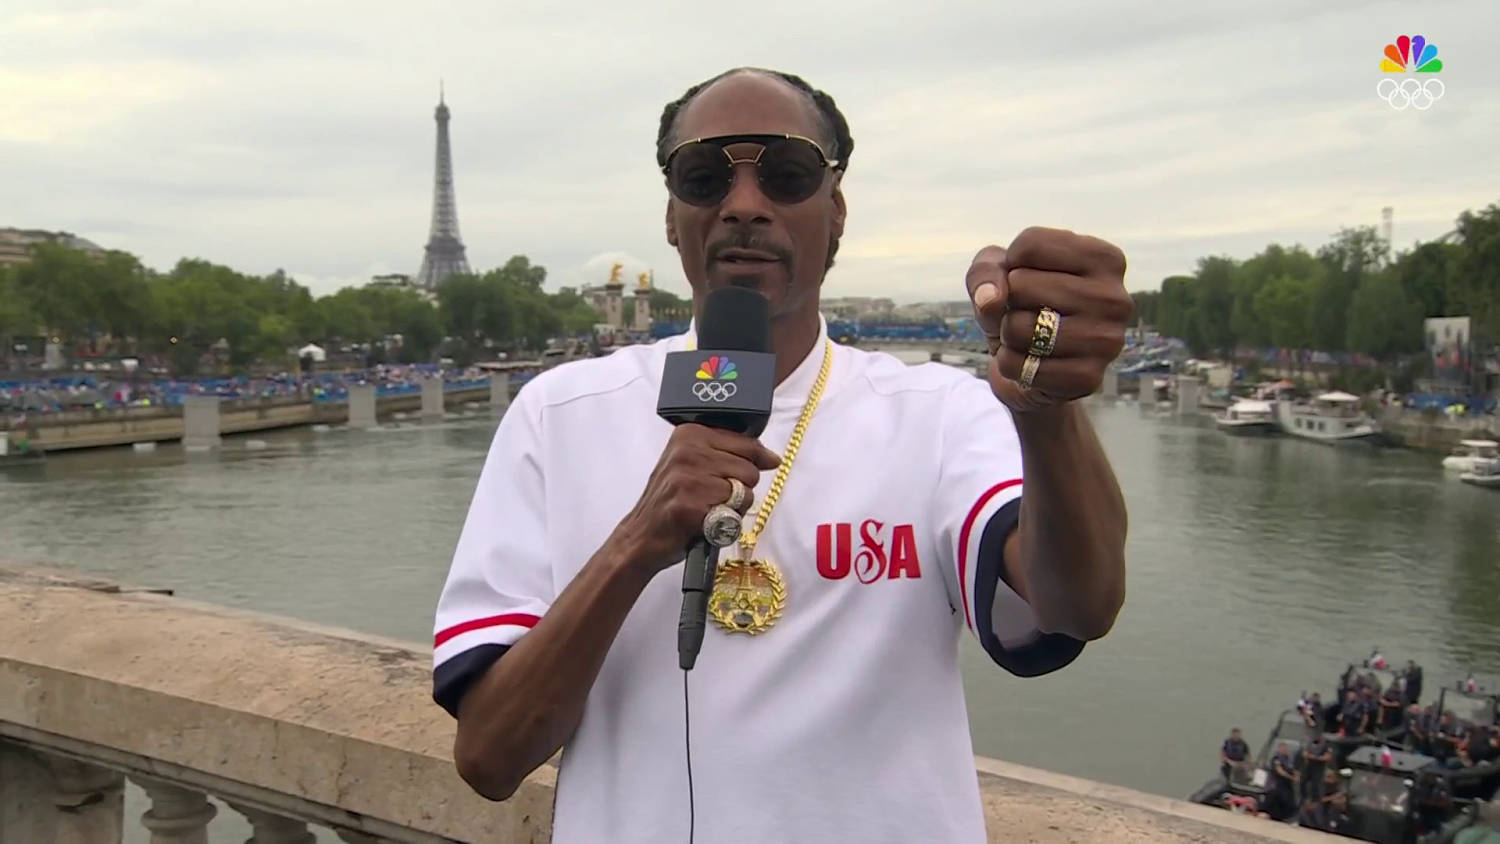 Snoop Dogg on Olympics opening ceremony: 'When you hold the torch, you're a peace messenger'